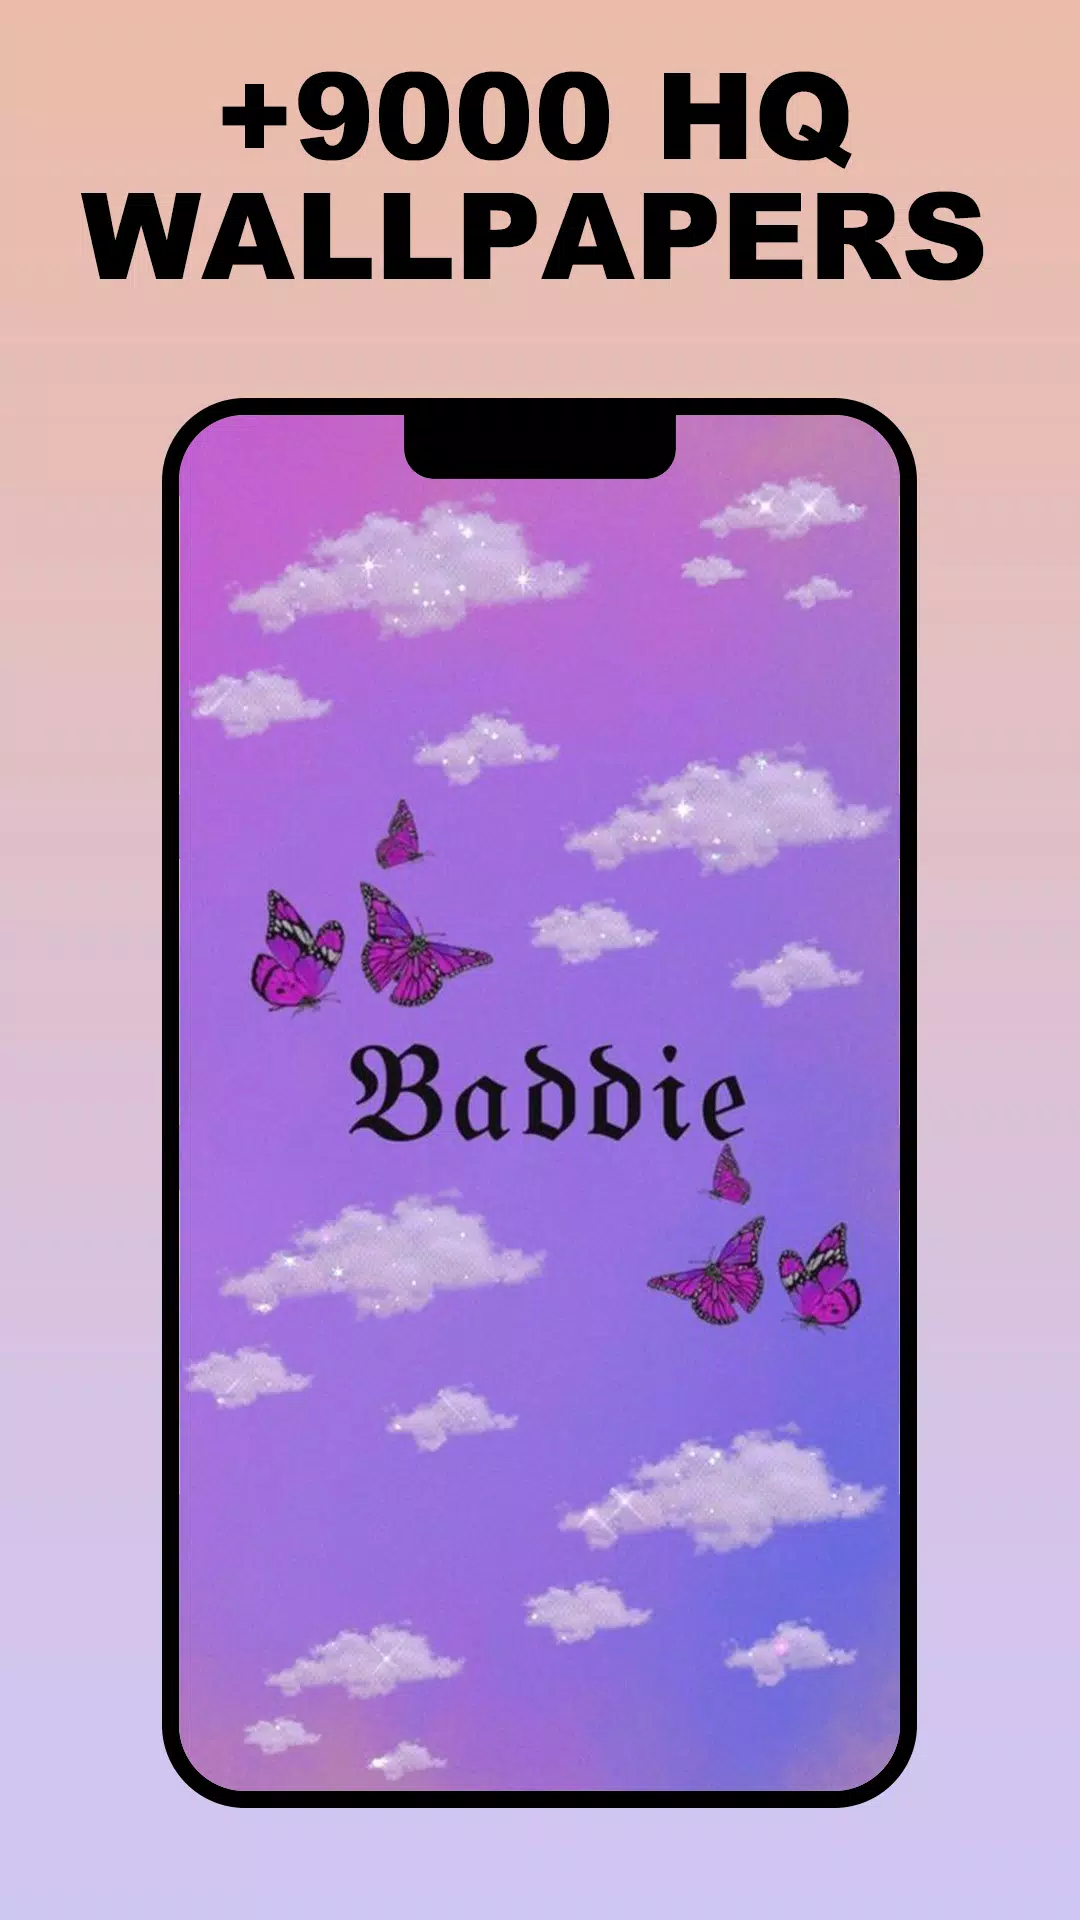 aesthetic baddie wallpapers APK for Android Download